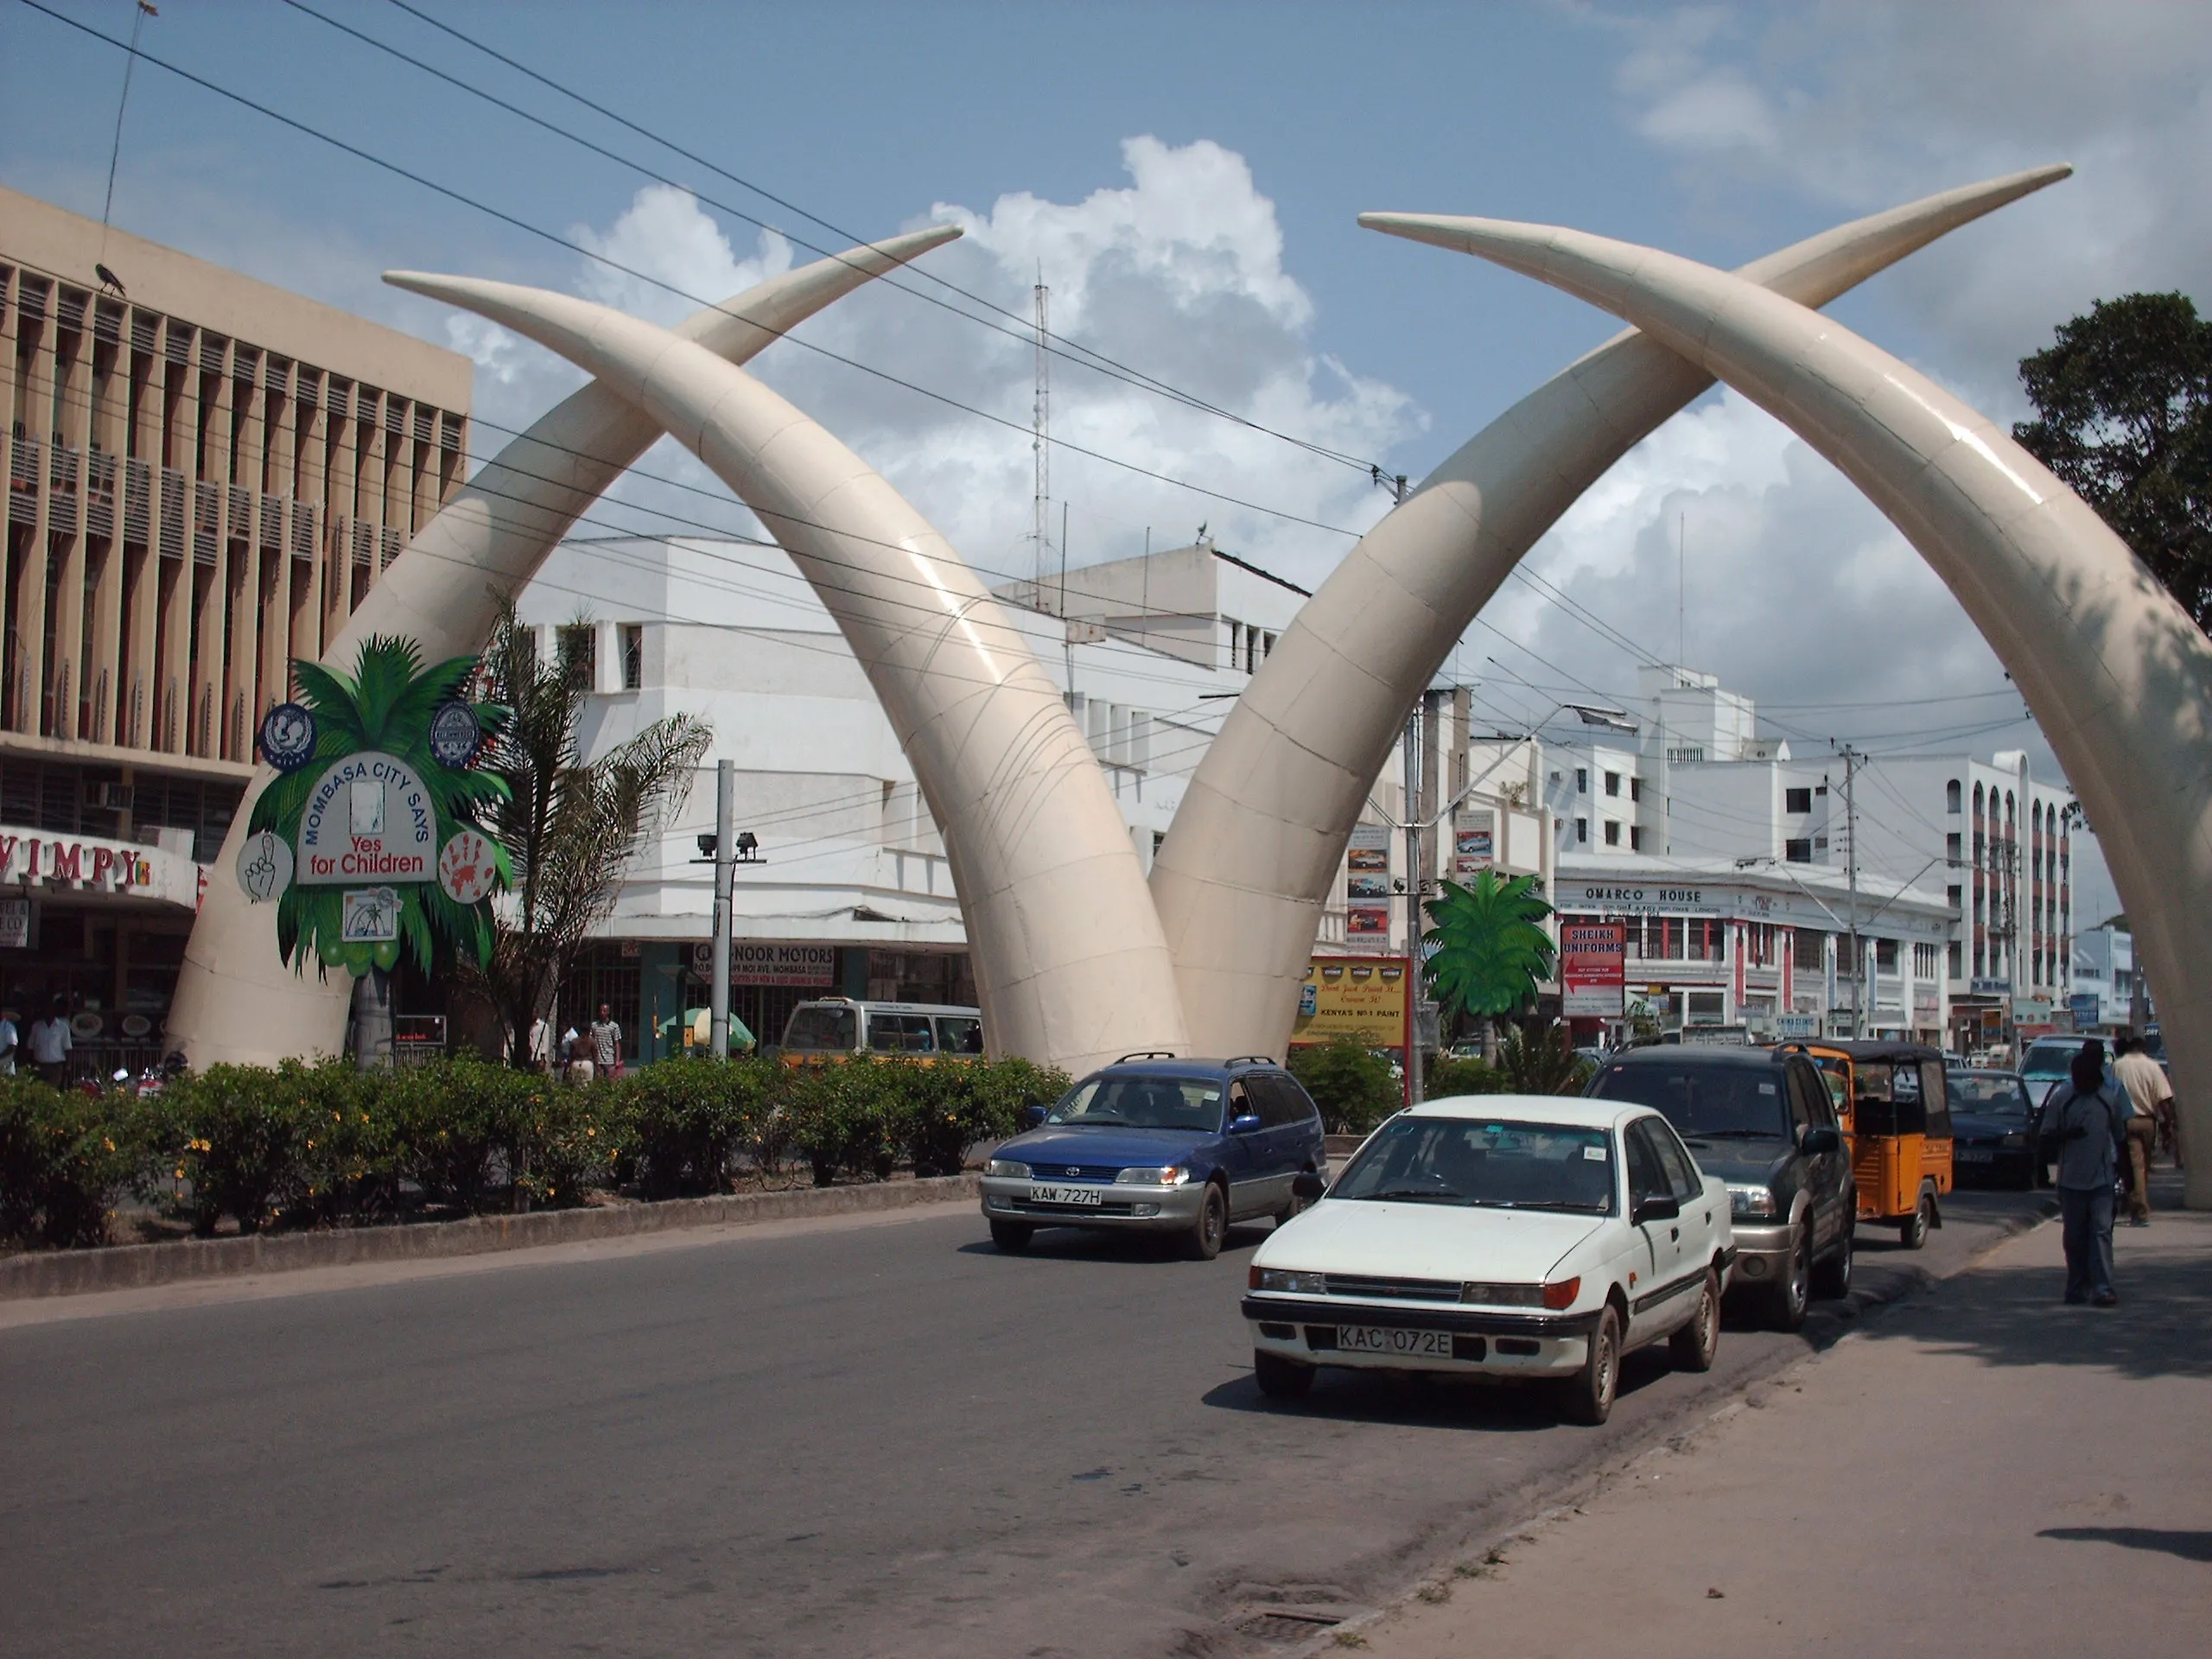 Mombasa Tusks in Kenya, Africa | Monuments - Rated 4.1